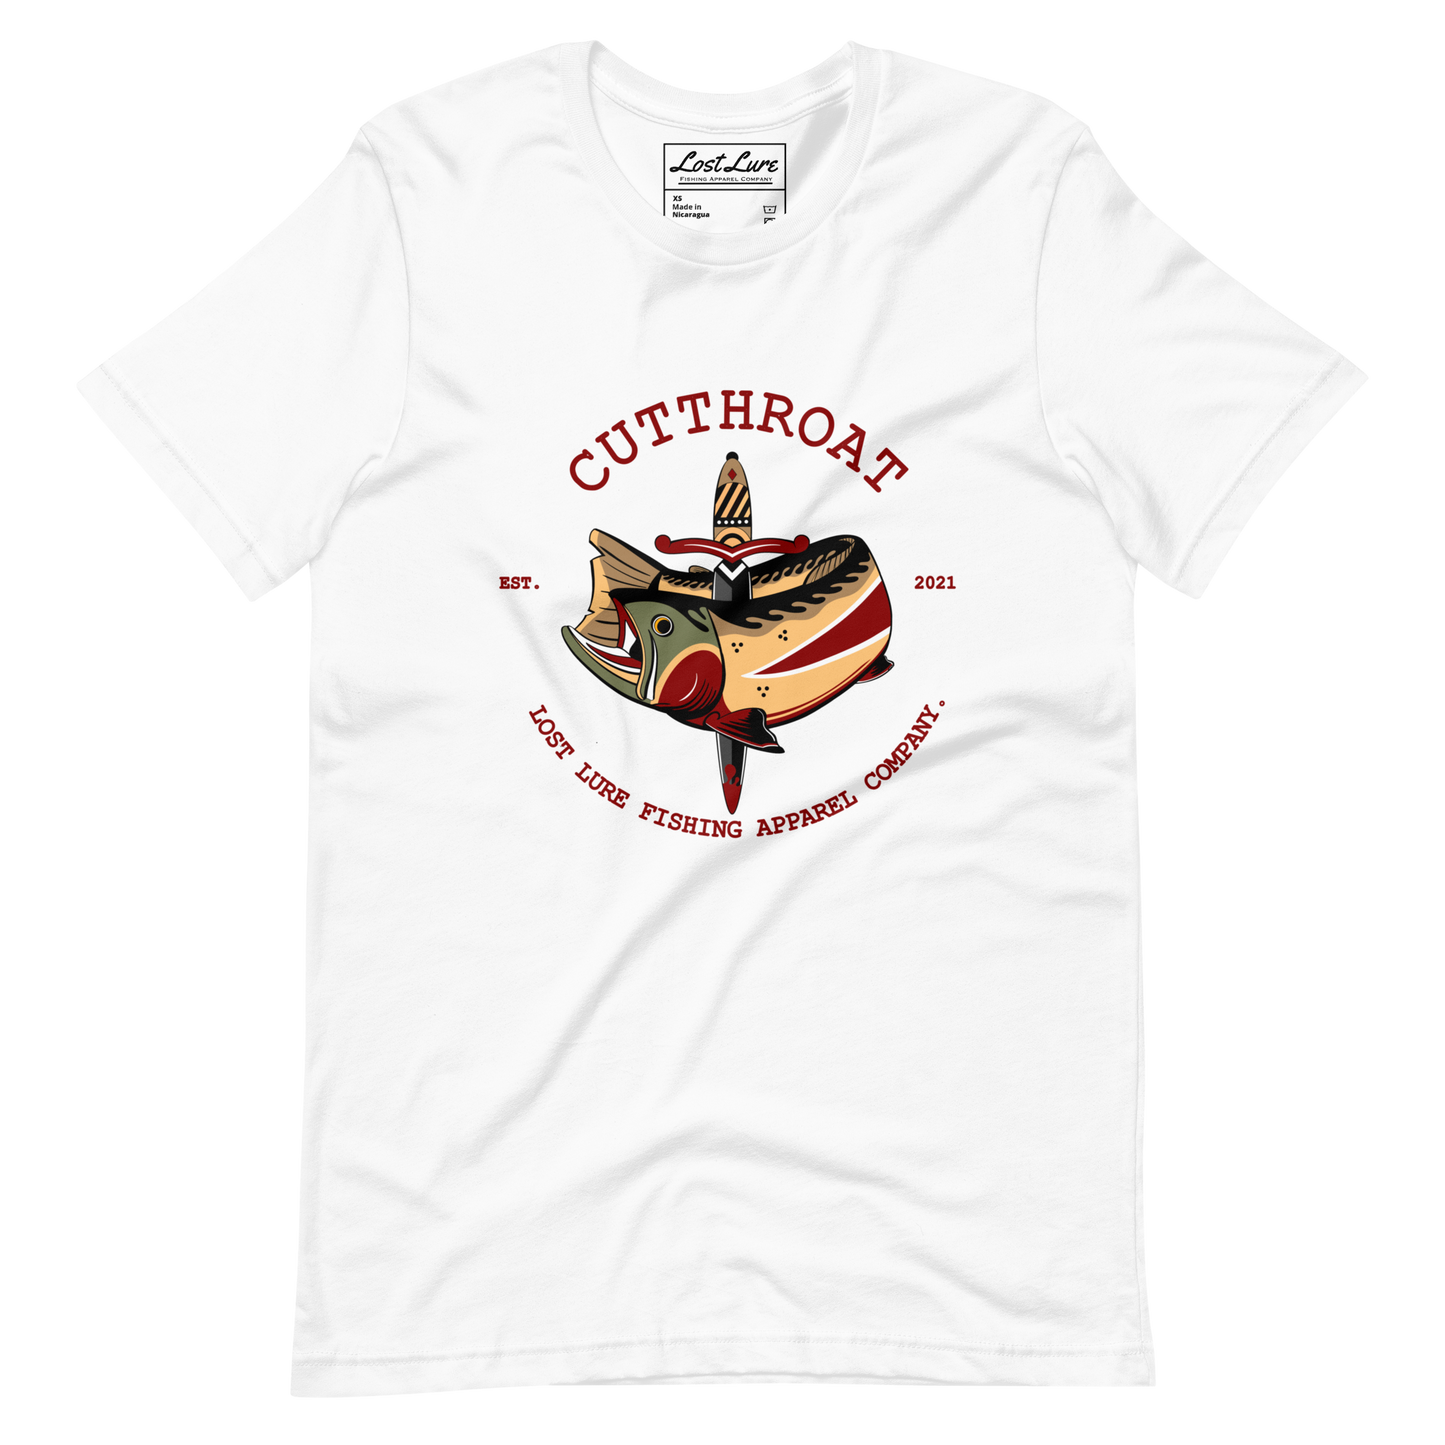 Cutthroat Trout fishing shirt. It’s an American traditional style design with a cutthroat trout and a dagger. The shirt reads Cutthroat trout, est. 2021, lost lure fishing apparel company. The fishing design is on the front of the shirt. White shirt